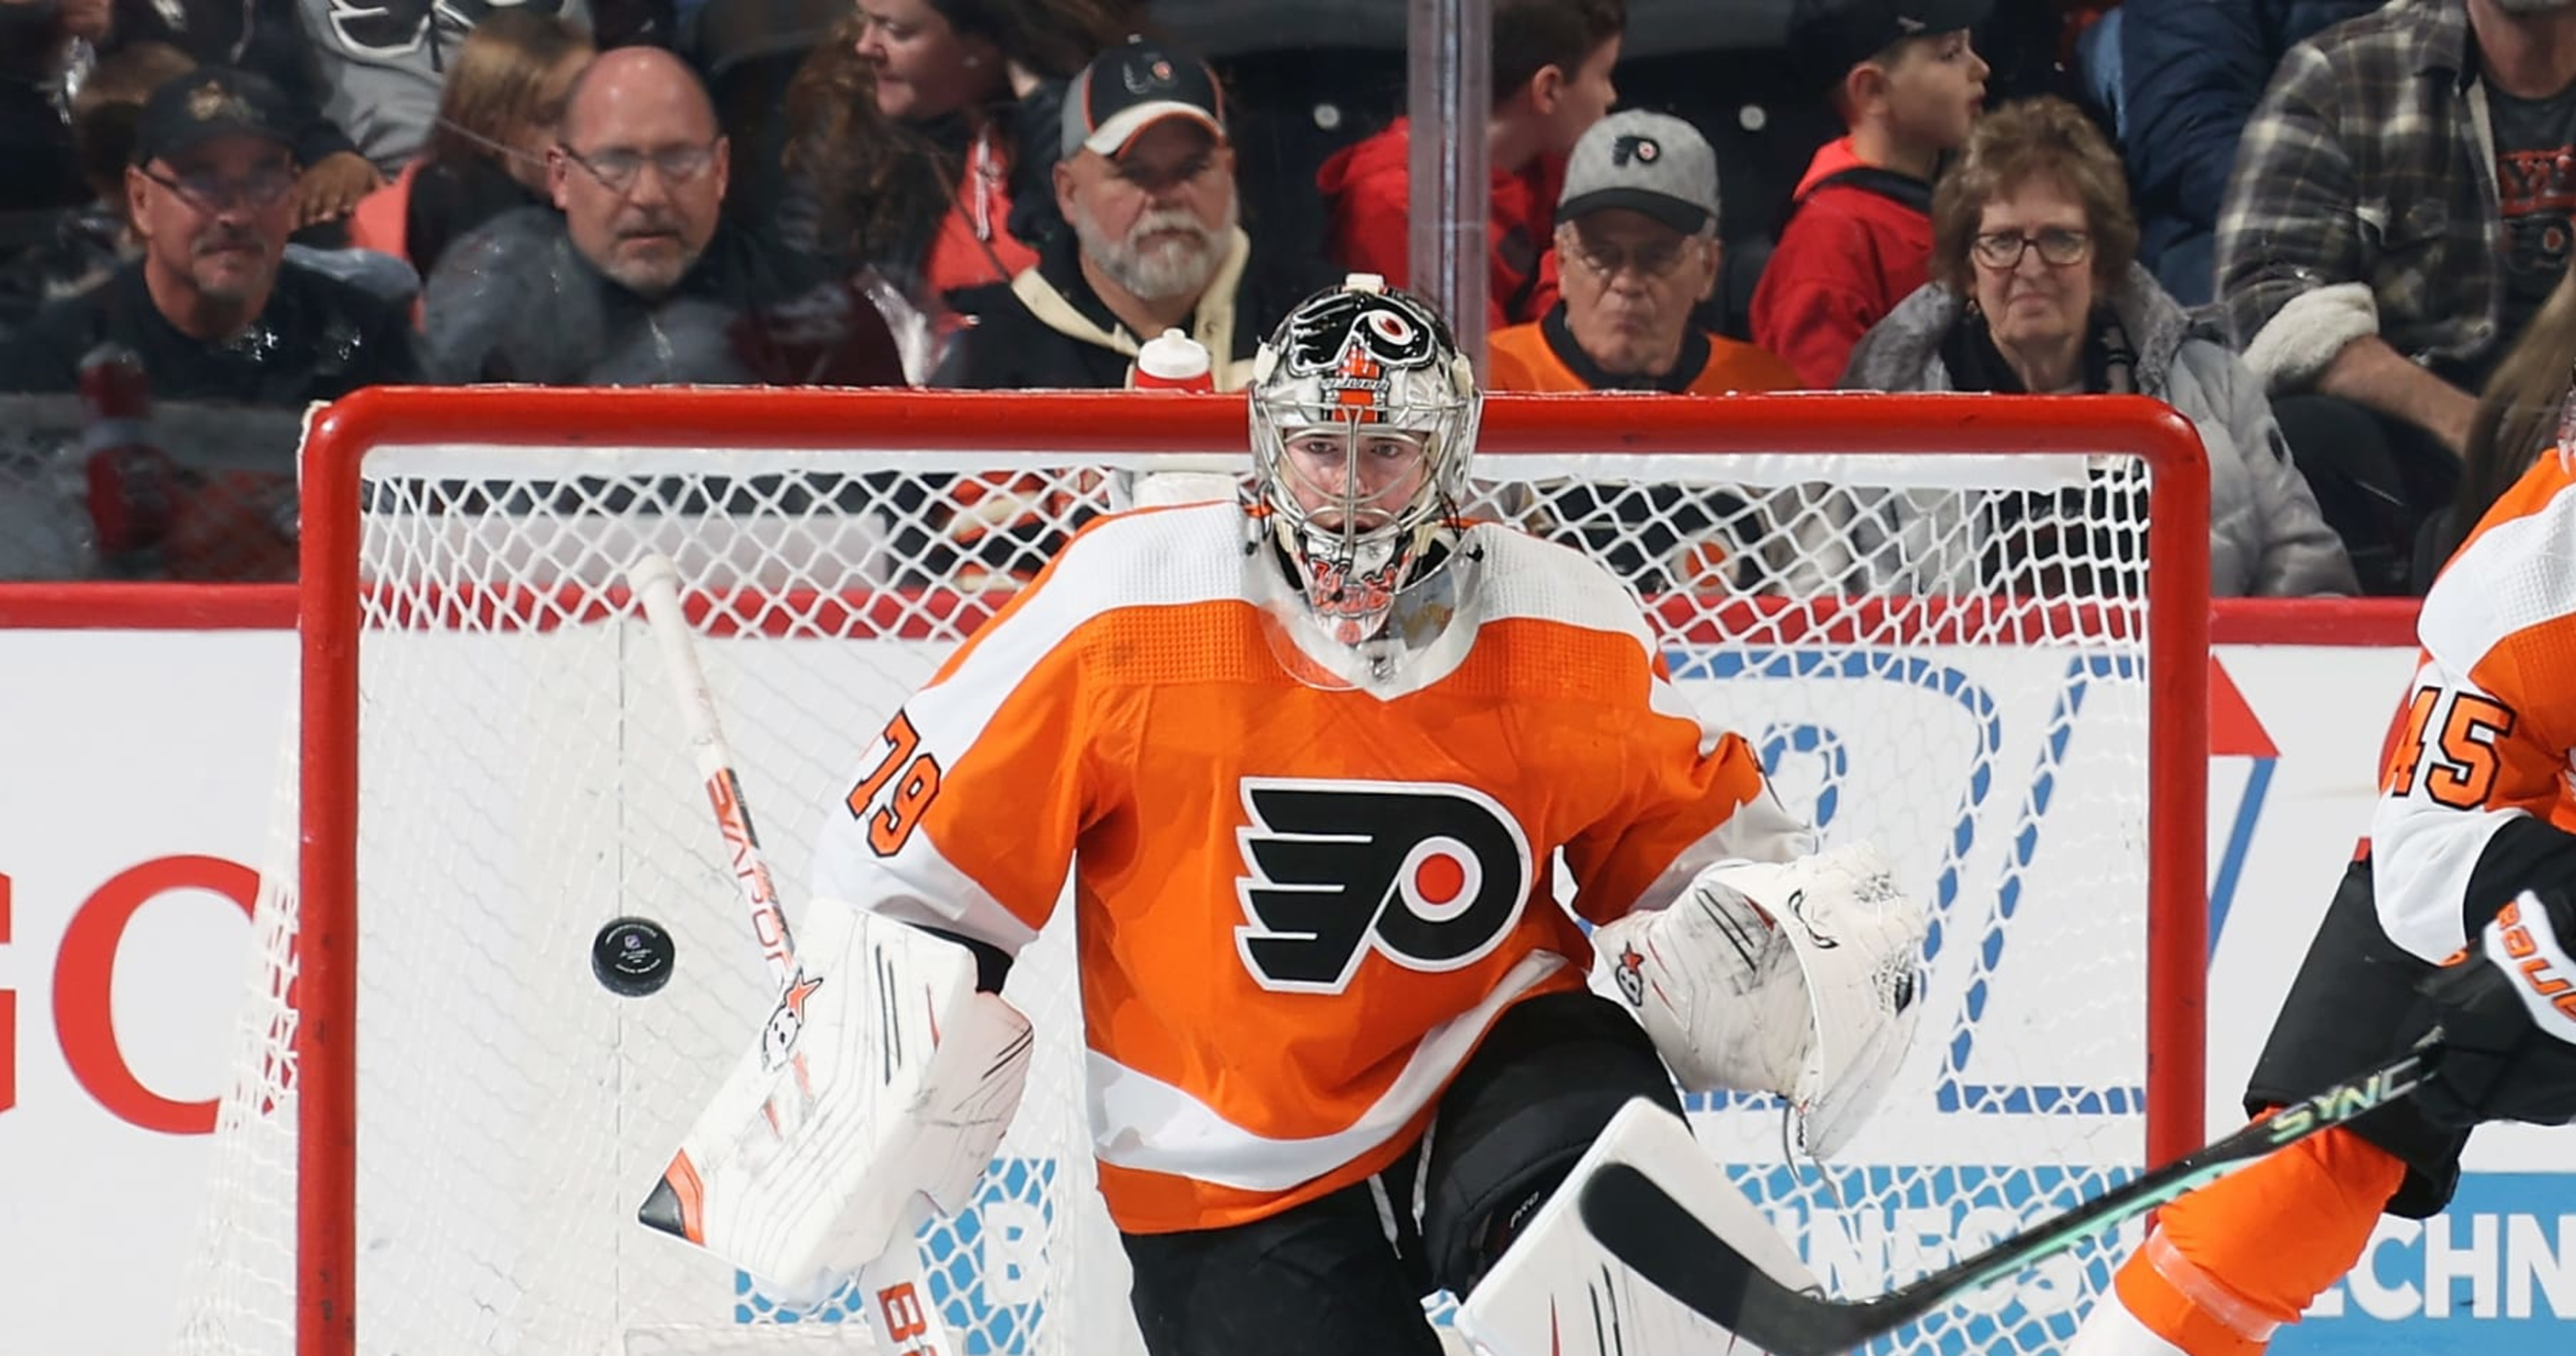 Flyers Goalie Prospect Carter Hart Chooses No. 79 for a Special Reason